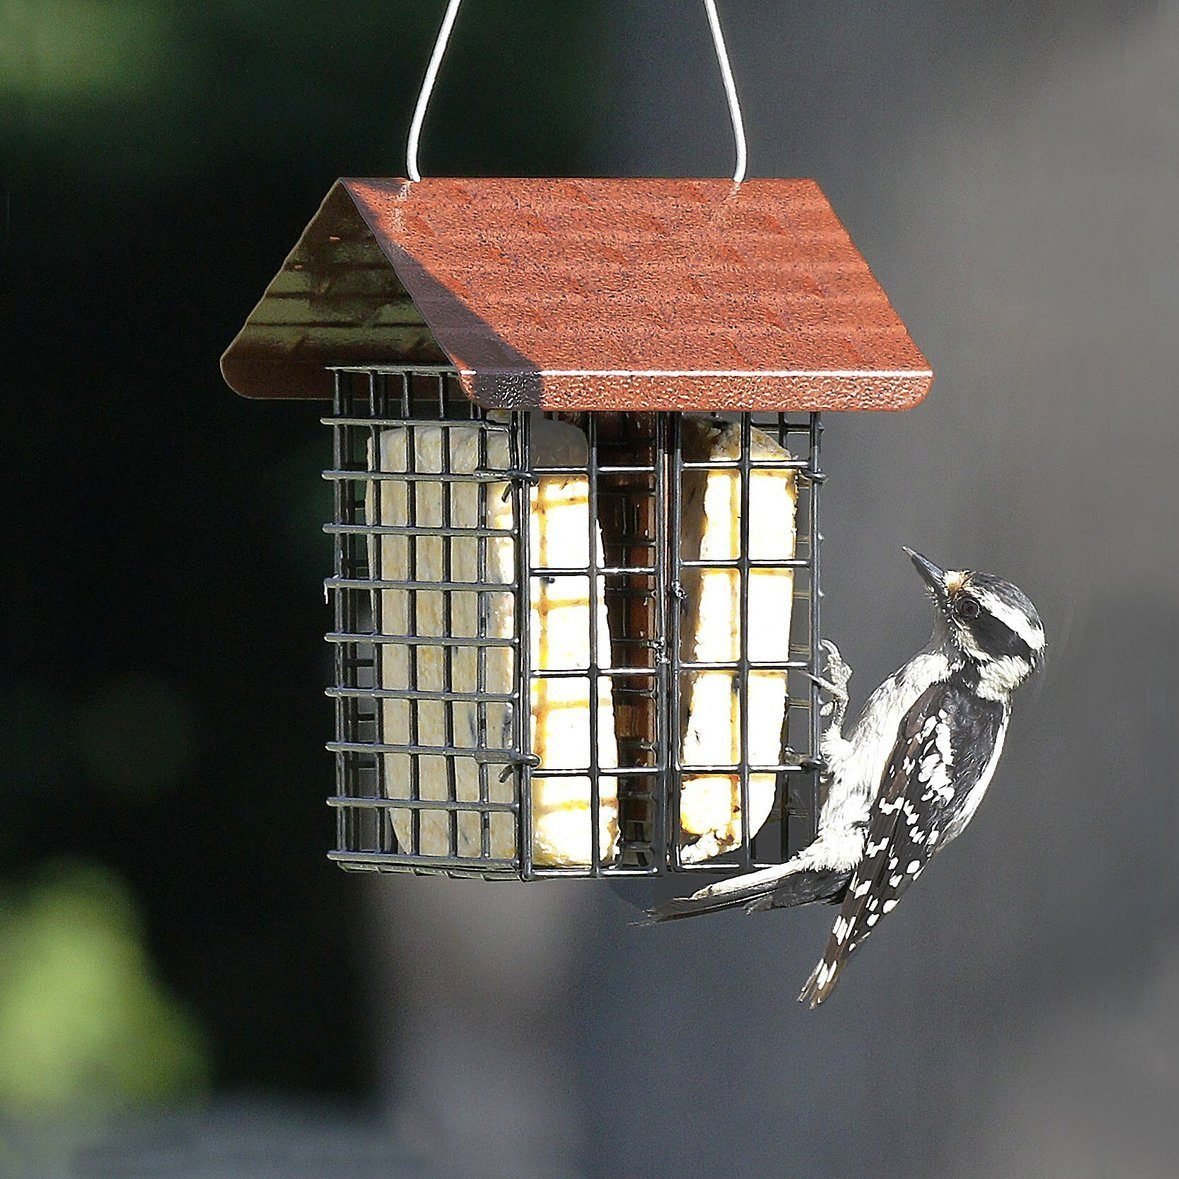 The 8 Best Bird Feeders to Attract Woodpeckers